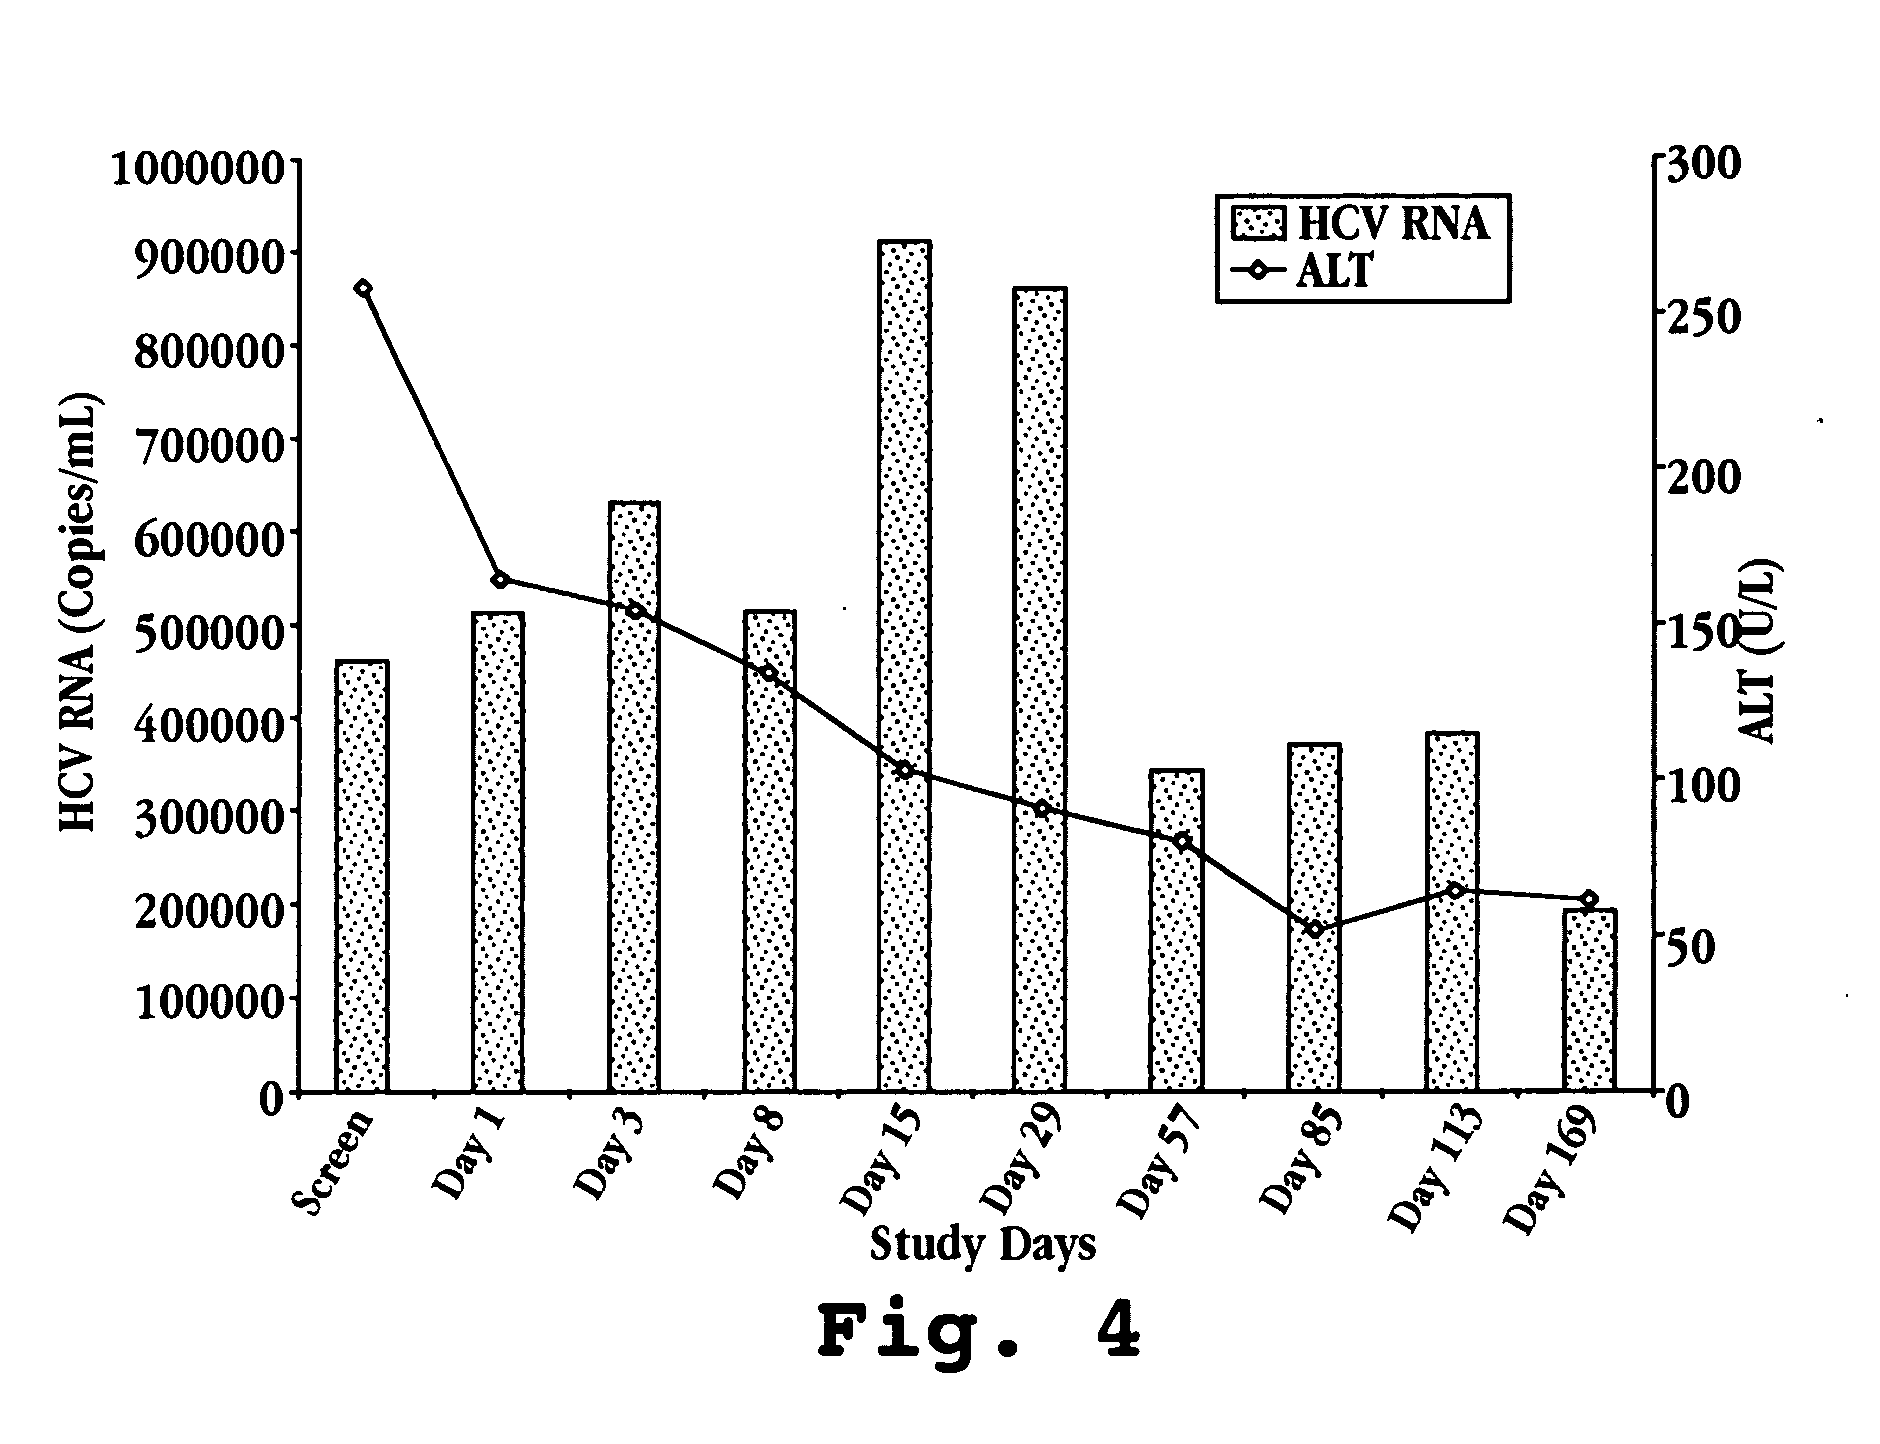 Composition for treatment of and method of monitoring hepatitis C virus using interferon-tau